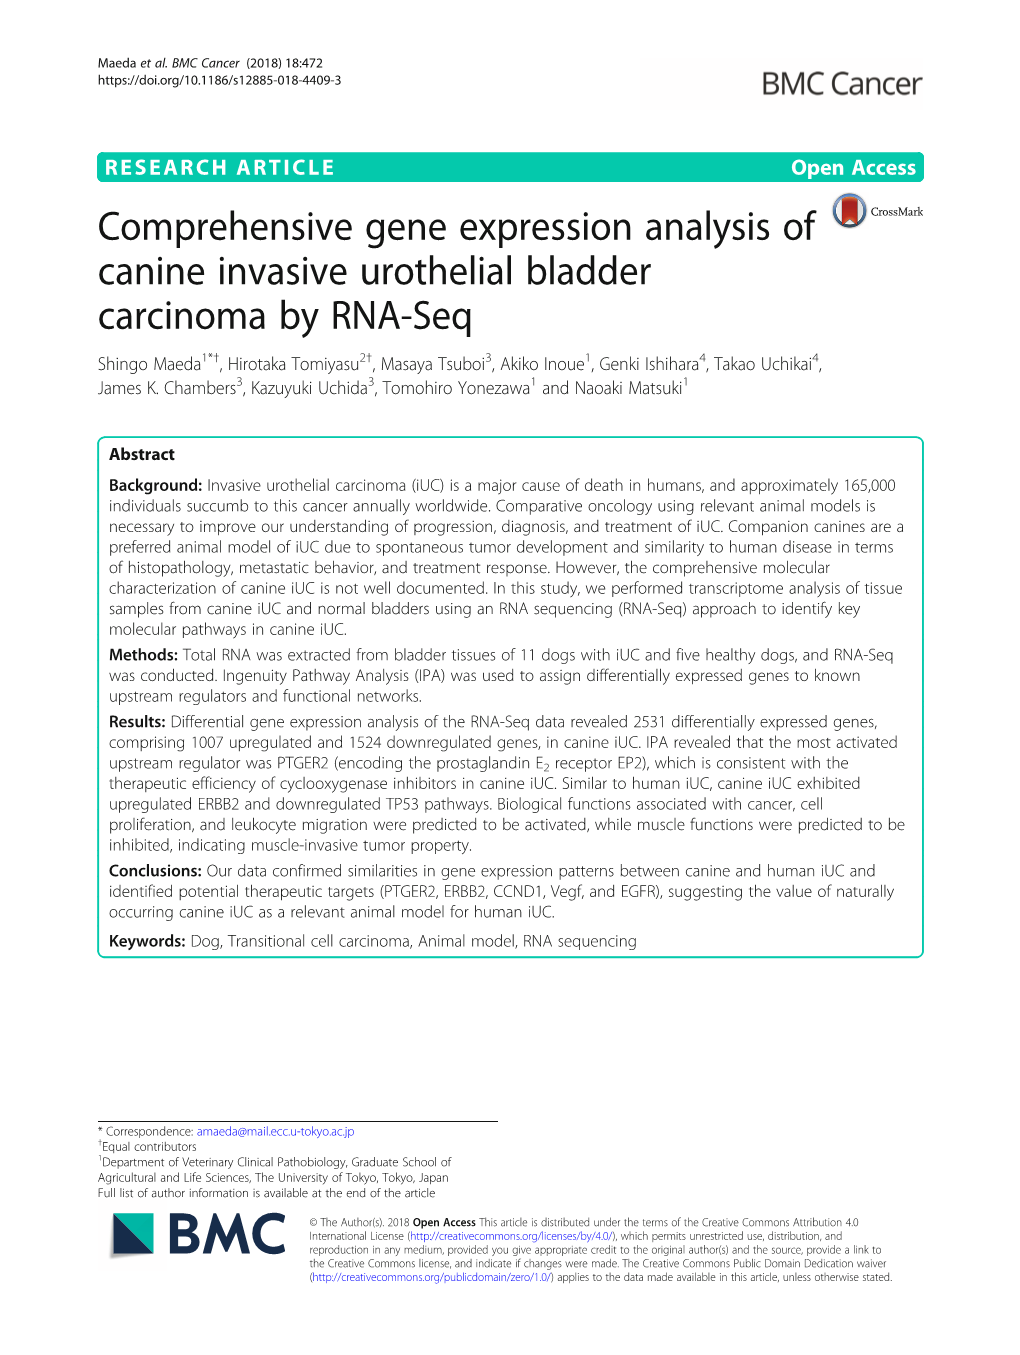 Comprehensive Gene Expression Analysis of Canine Invasive